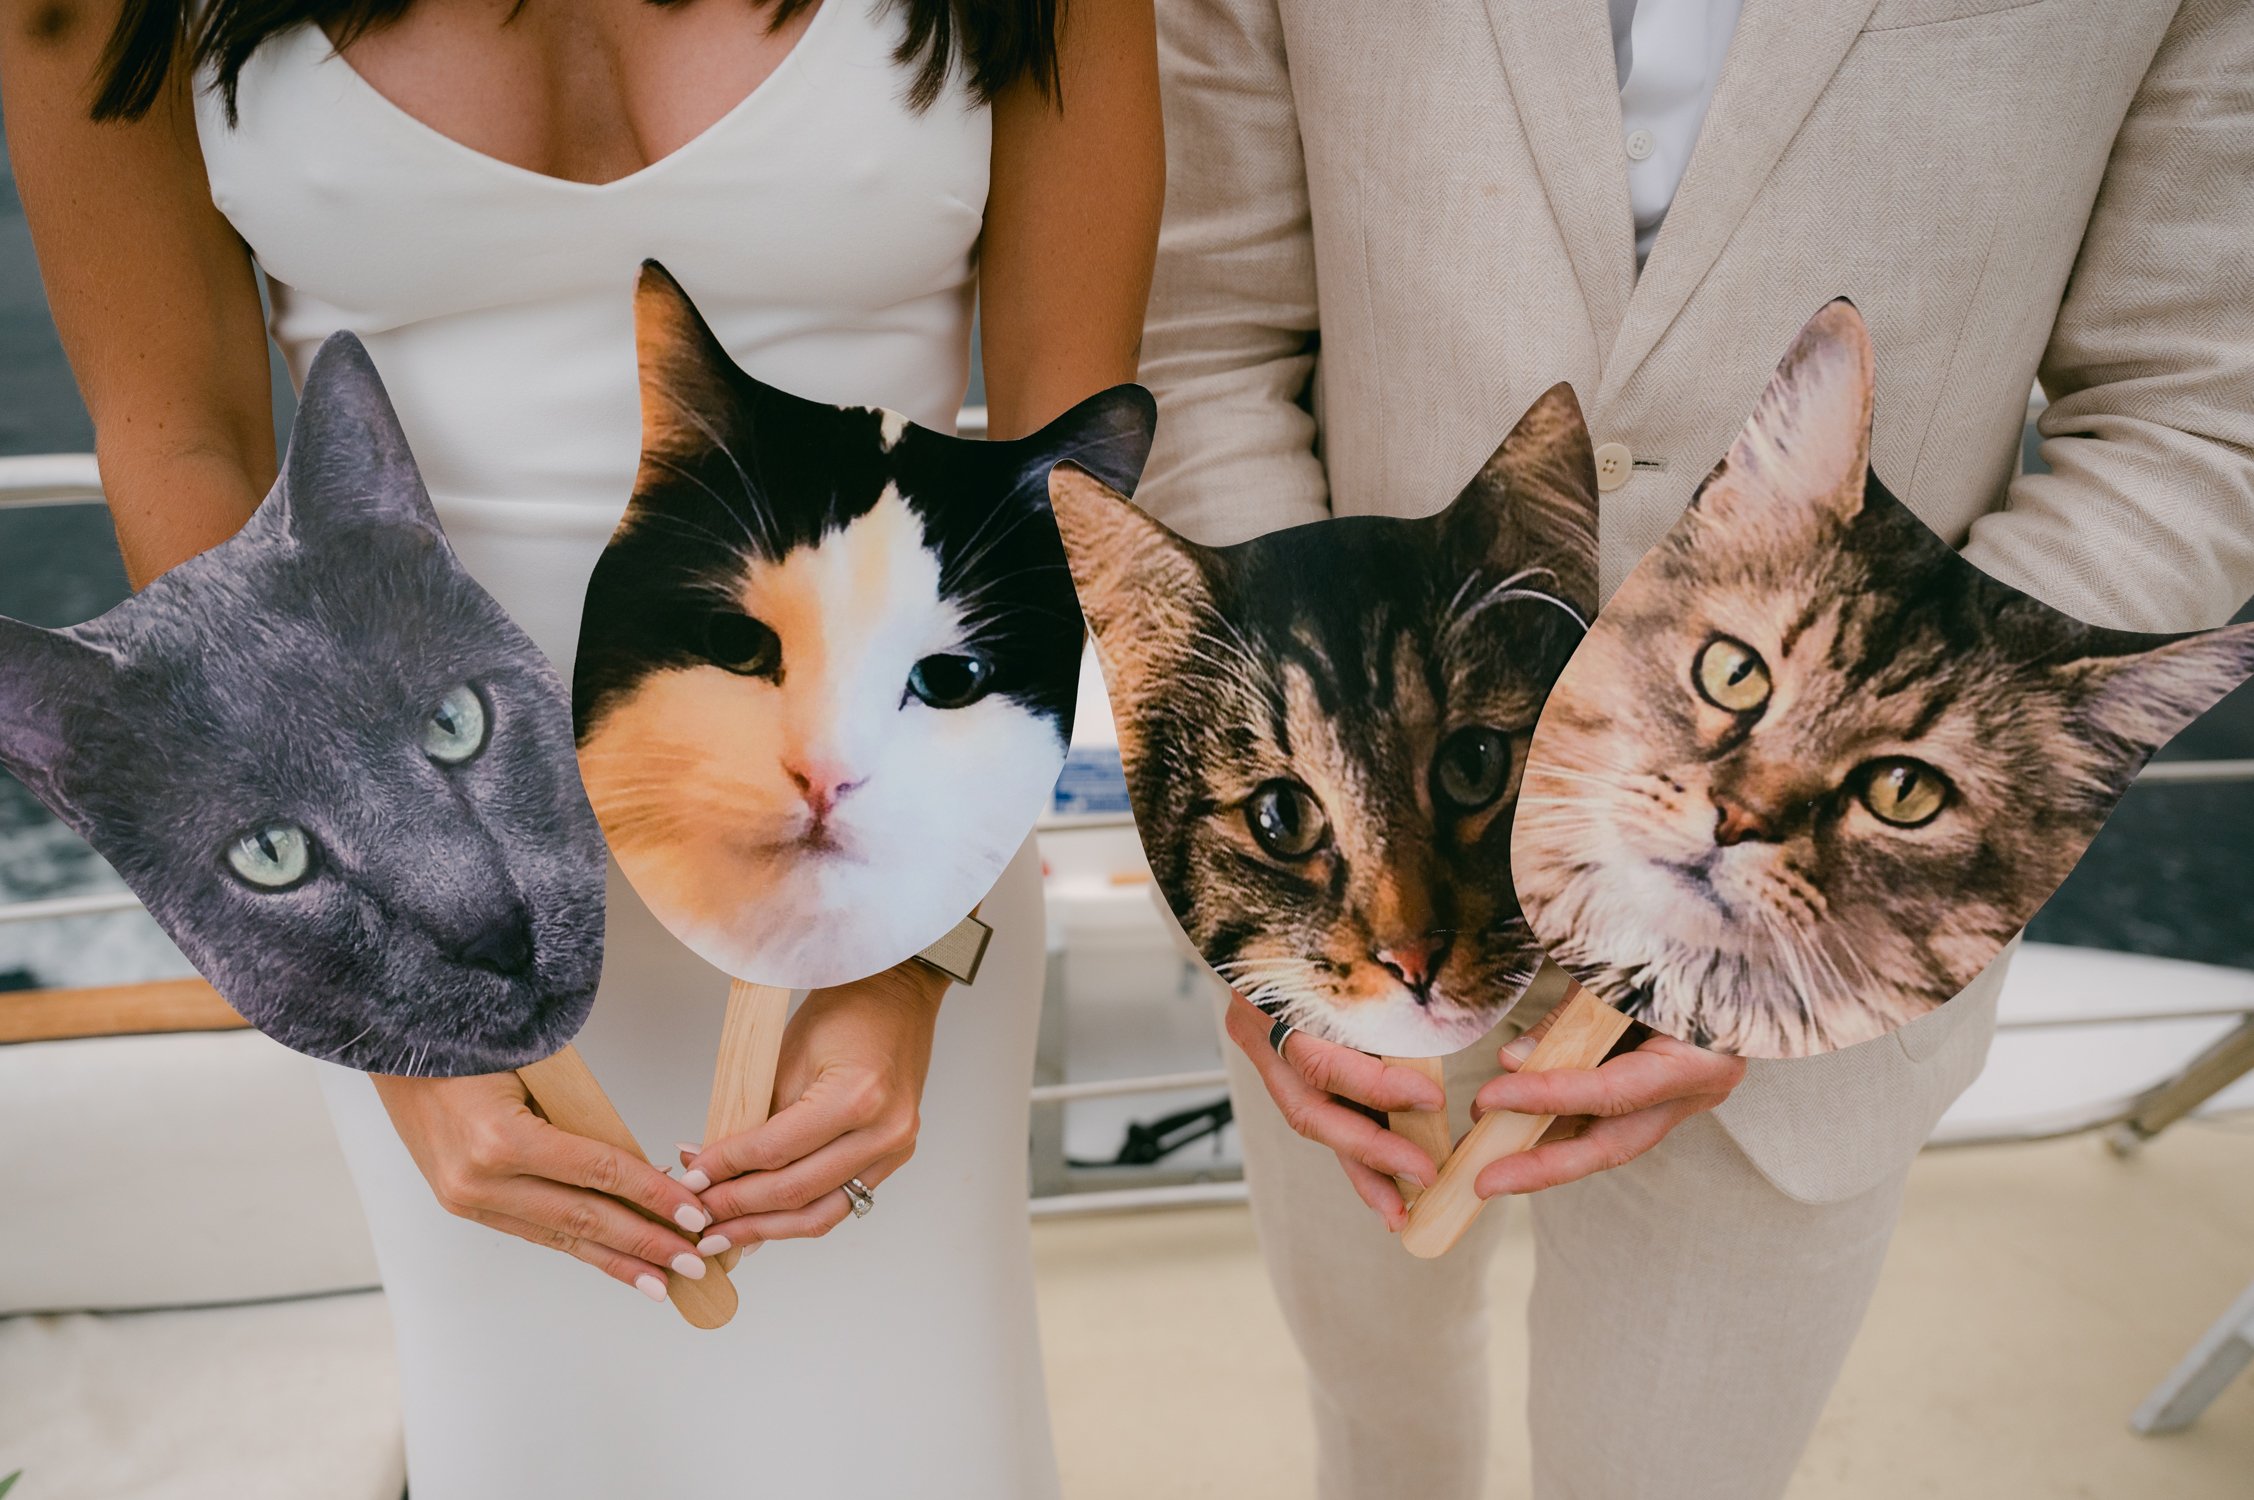 Lake Tahoe Yacht wedding, photo of cat cut-outs